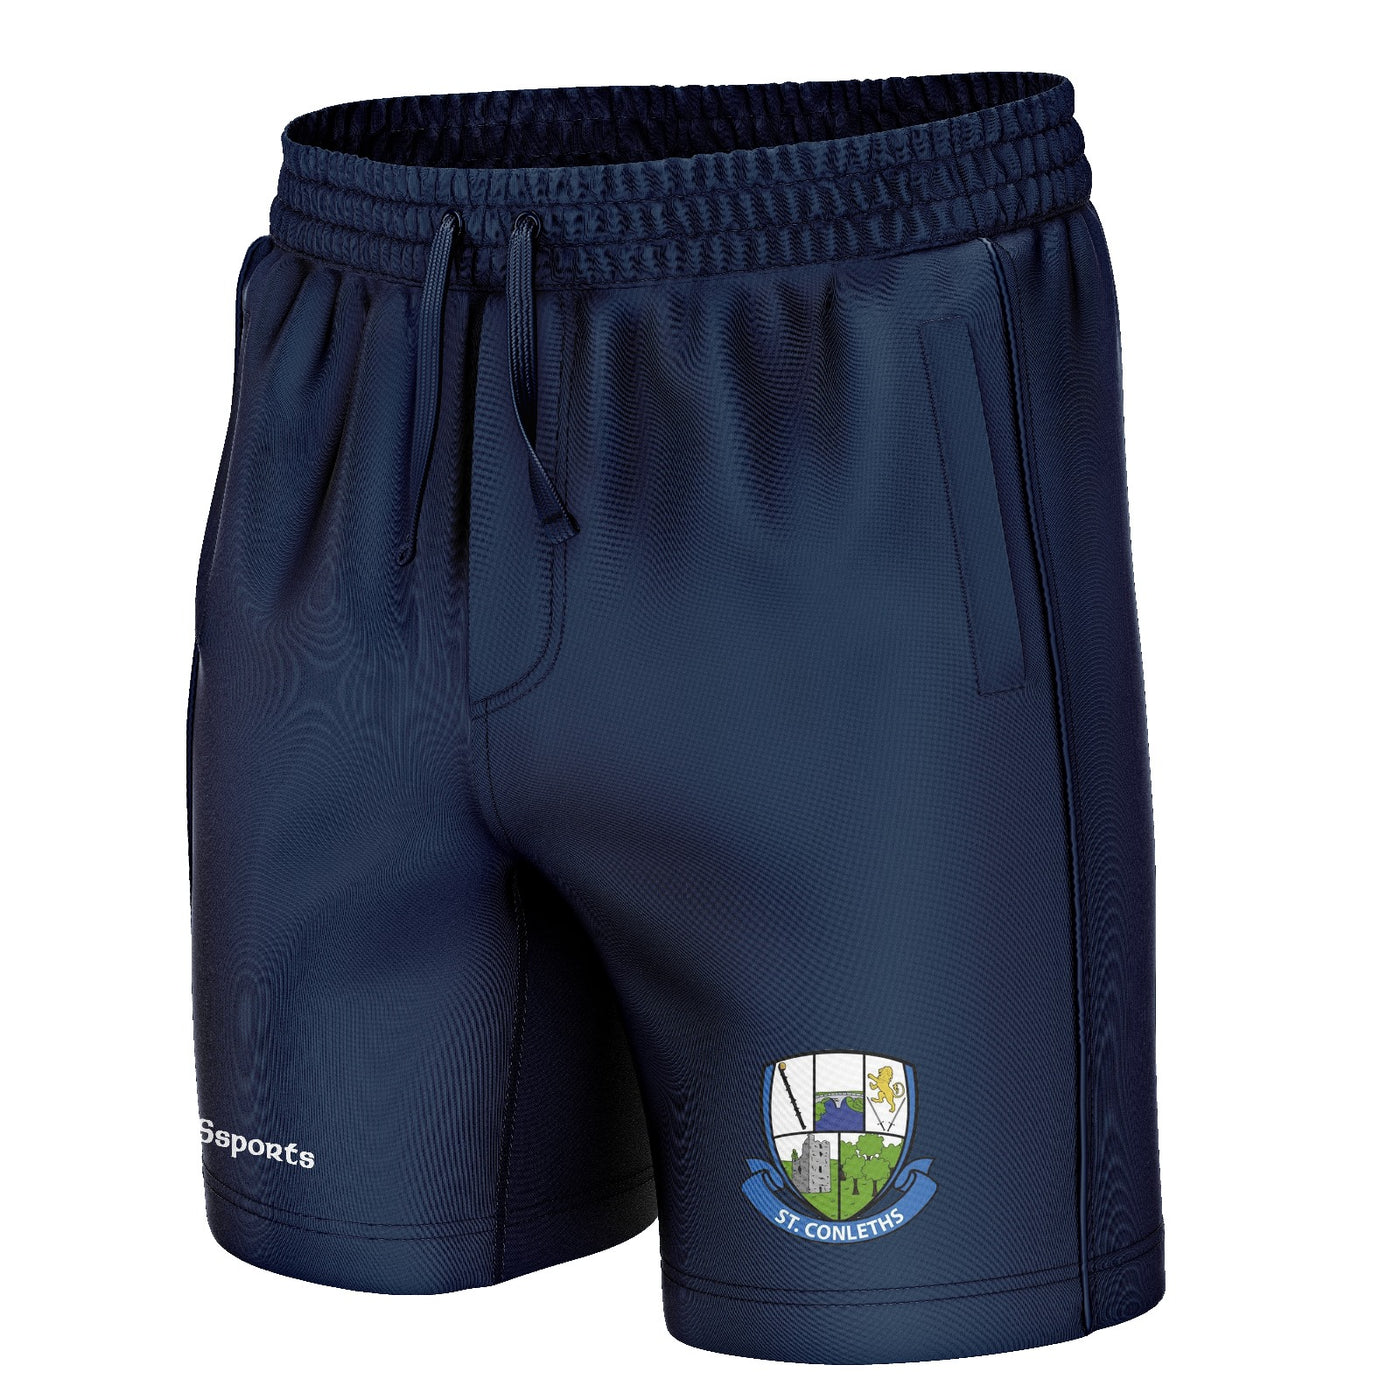 St. Conleths -Motion Leisure Shorts (Stock)